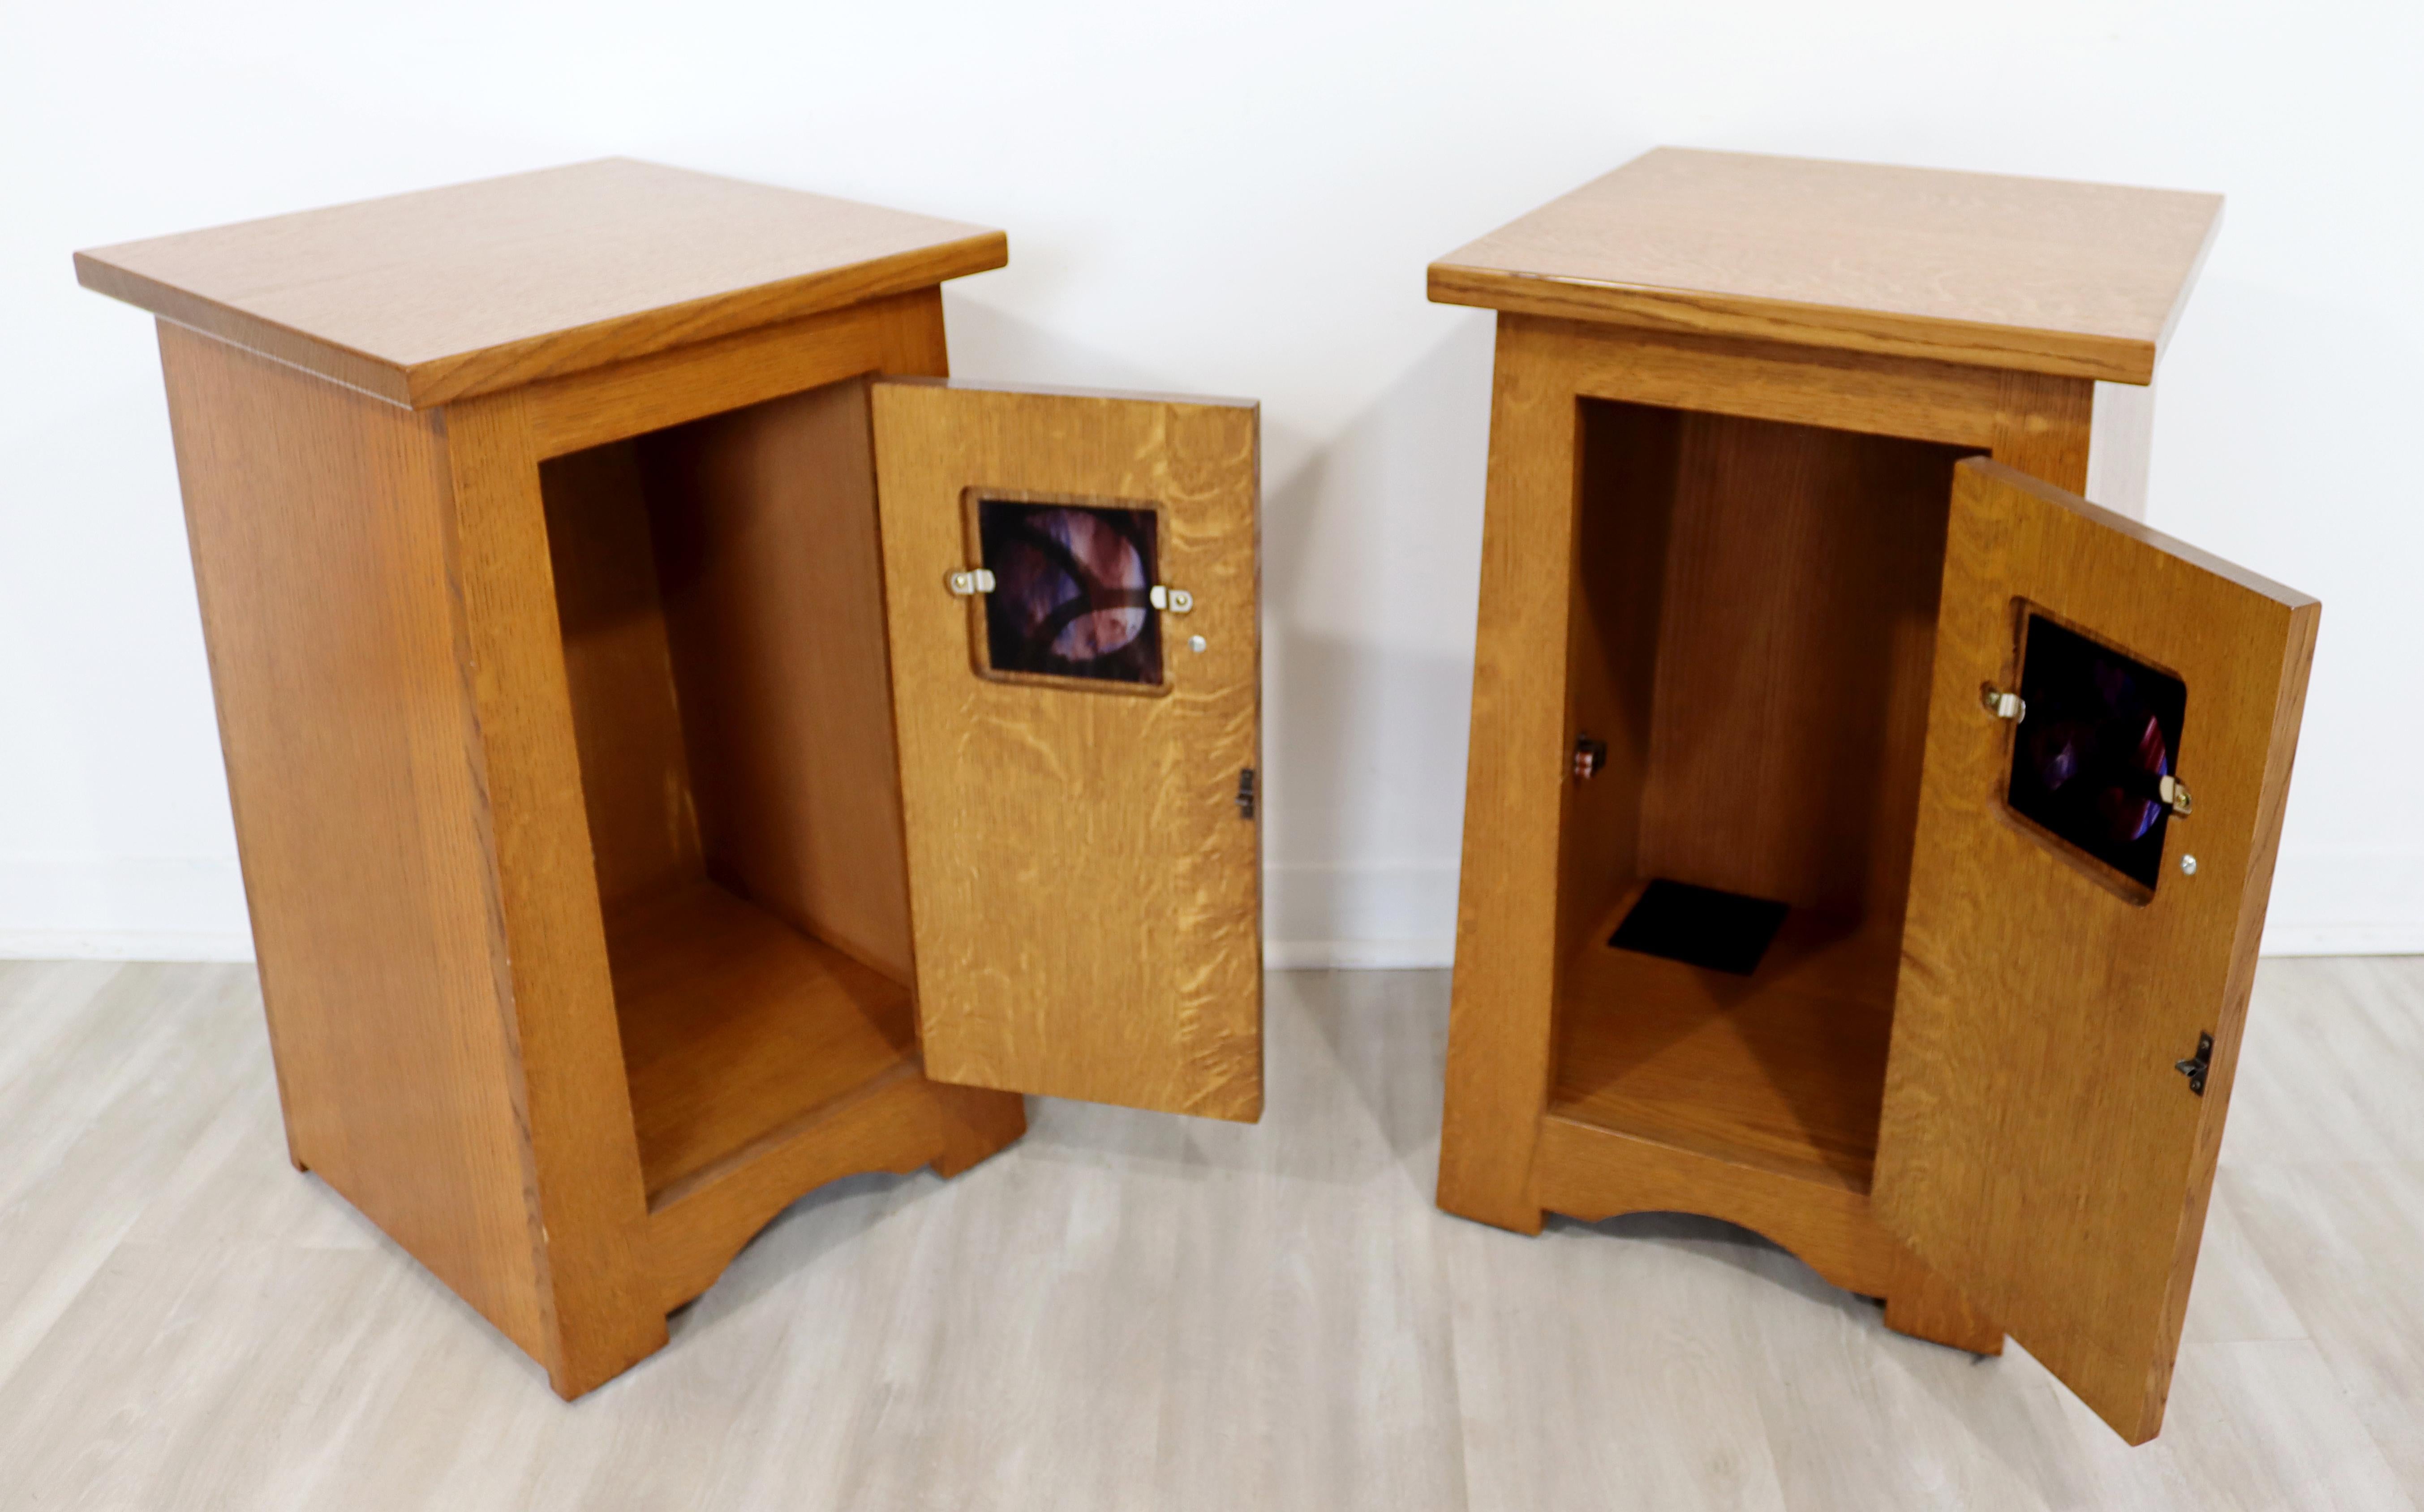 American Mid-Century Modern Mission Style Pair of Wood Nightstands Side End Tables, 1970s